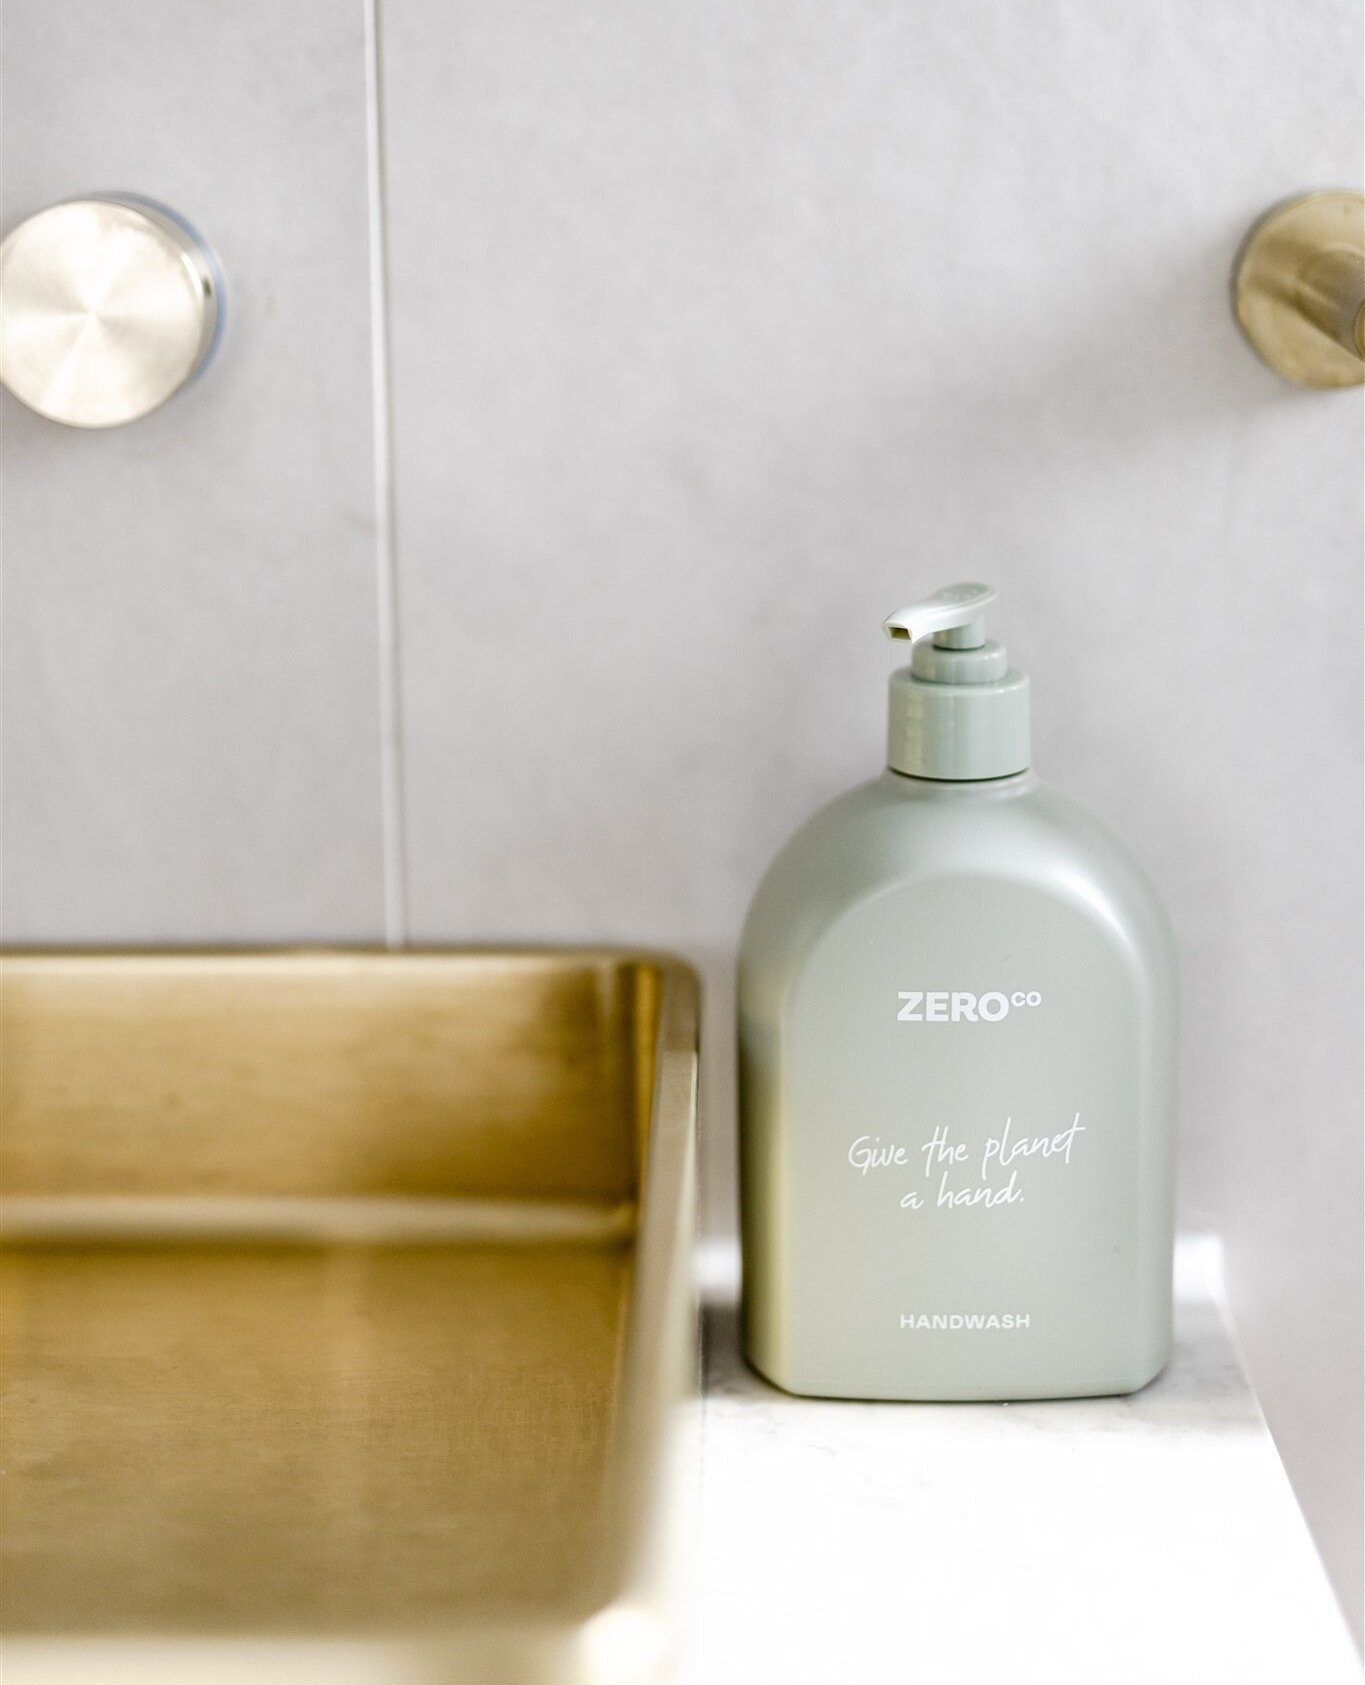 Did you know that we provide @zeroco.com.au⁠
bathroom and cleaning products in Kahlo Bondi? The forever bottles are refillable to make it lighter on the planet and more sustainable for our future.  These high quality products are complimentary during